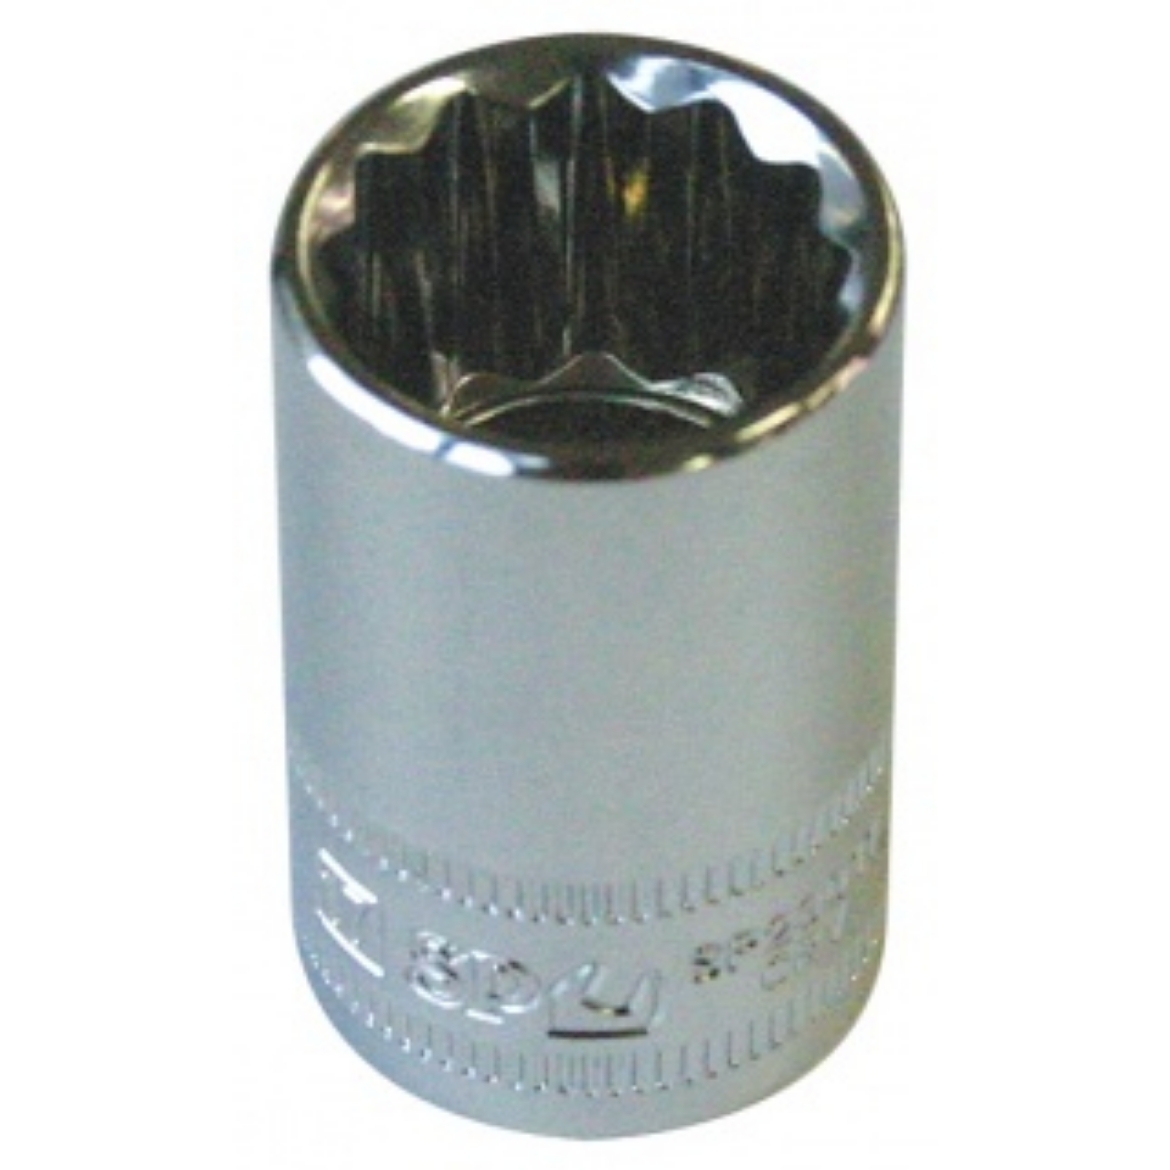 Picture of SOCKET 1/2"DR 12PT METRIC 18MM SP TOOLS